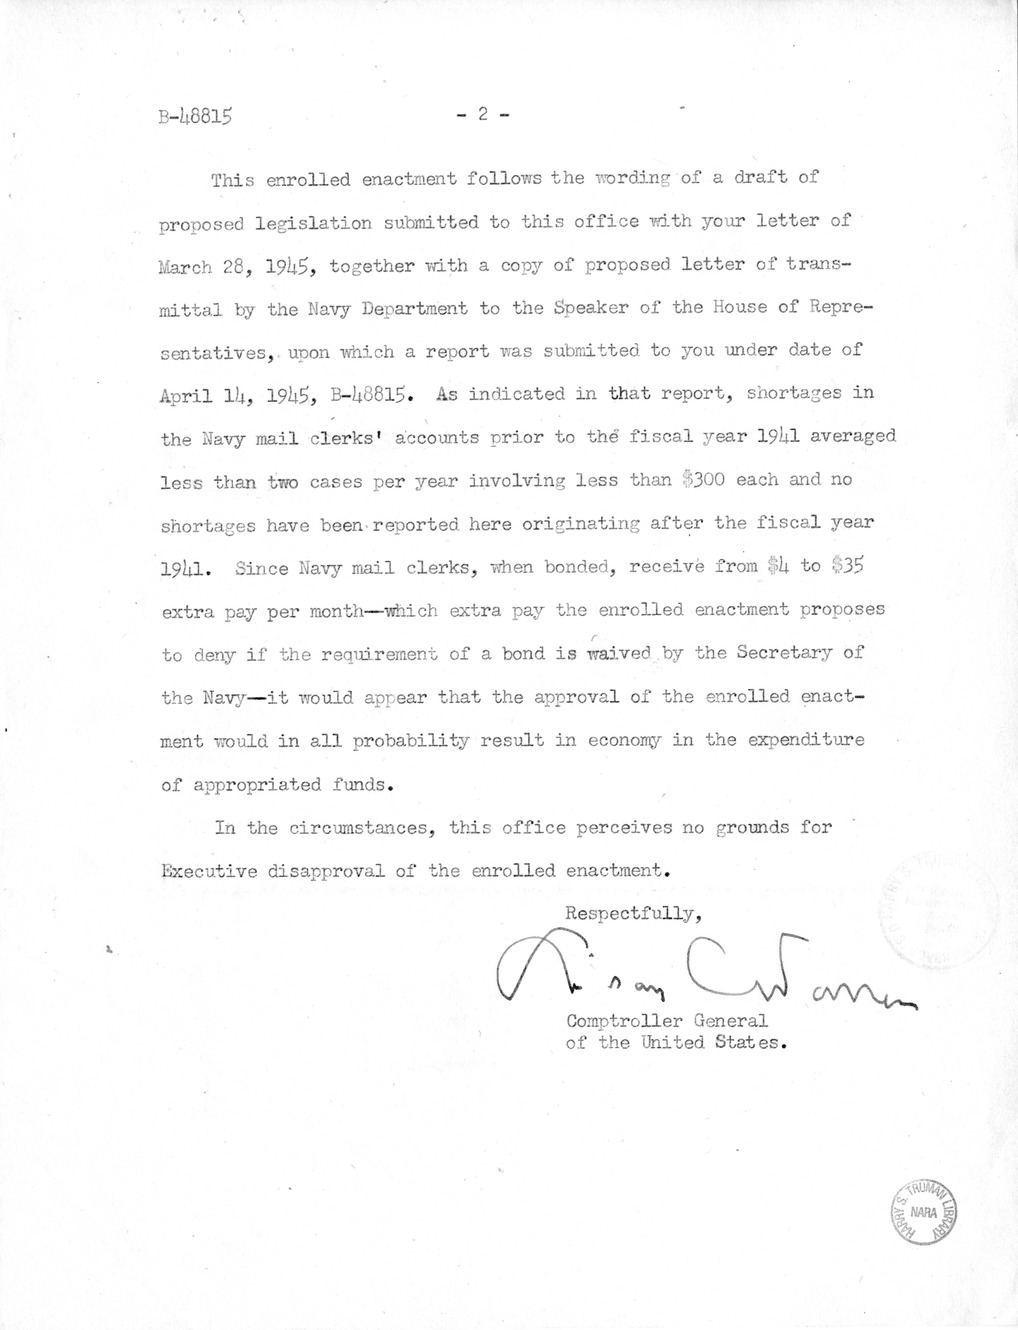 Memorandum from Harold D. Smith to M. C. Latta, H.R. 3193, To Permit Waiving of the Bonds of Navy Mail Clerks and Assistant Navy Mail Clerks, and for Other Purposes, with Attachments